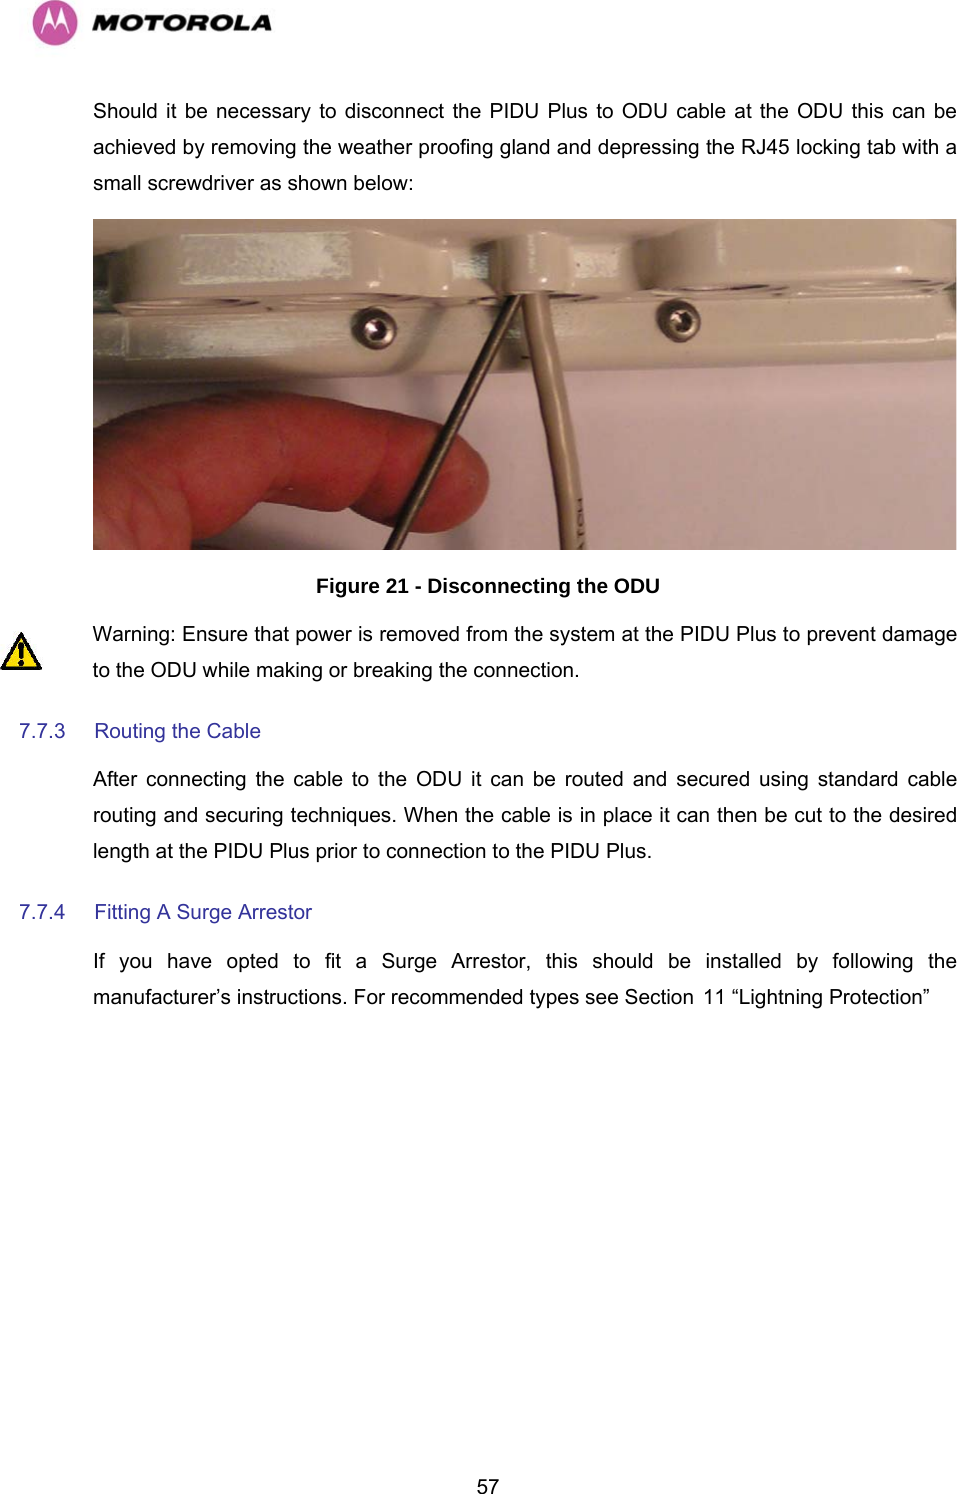   57Should it be necessary to disconnect the PIDU Plus to ODU cable at the ODU this can be achieved by removing the weather proofing gland and depressing the RJ45 locking tab with a small screwdriver as shown below:   Figure 21 - Disconnecting the ODU Warning: Ensure that power is removed from the system at the PIDU Plus to prevent damage to the ODU while making or breaking the connection. 7.7.3  Routing the Cable  After connecting the cable to the ODU it can be routed and secured using standard cable routing and securing techniques. When the cable is in place it can then be cut to the desired length at the PIDU Plus prior to connection to the PIDU Plus. 7.7.4  Fitting A Surge Arrestor  If you have opted to fit a Surge Arrestor, this should be installed by following the manufacturer’s instructions. For recommended types see Section H11 “Lightning Protection” 